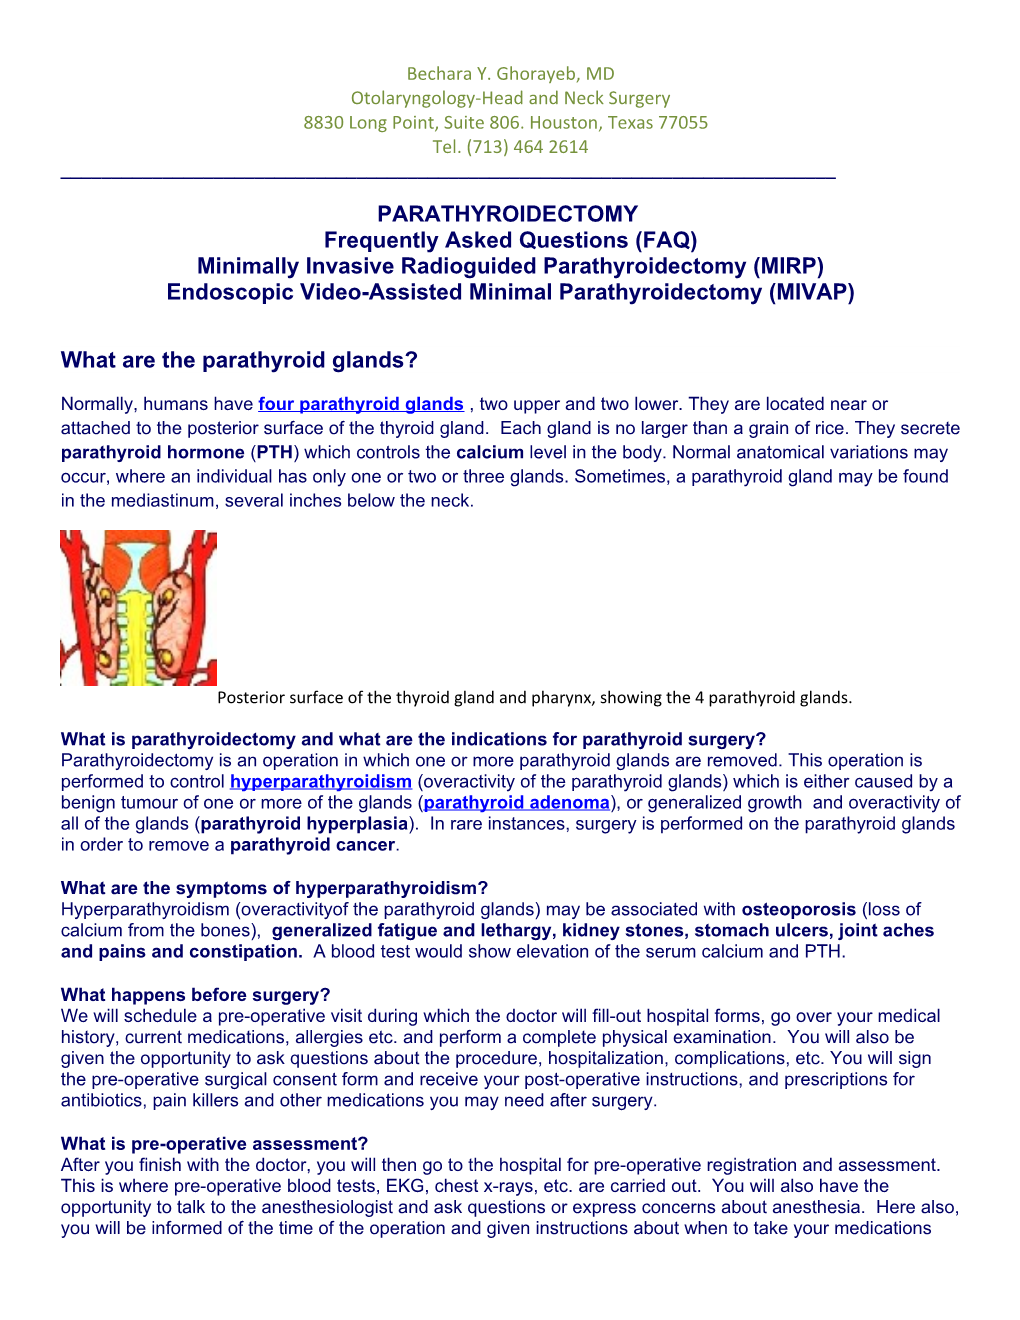 PARATHYROIDECTOMY Frequently Asked Questions (FAQ)Minimally Invasive Radioguided